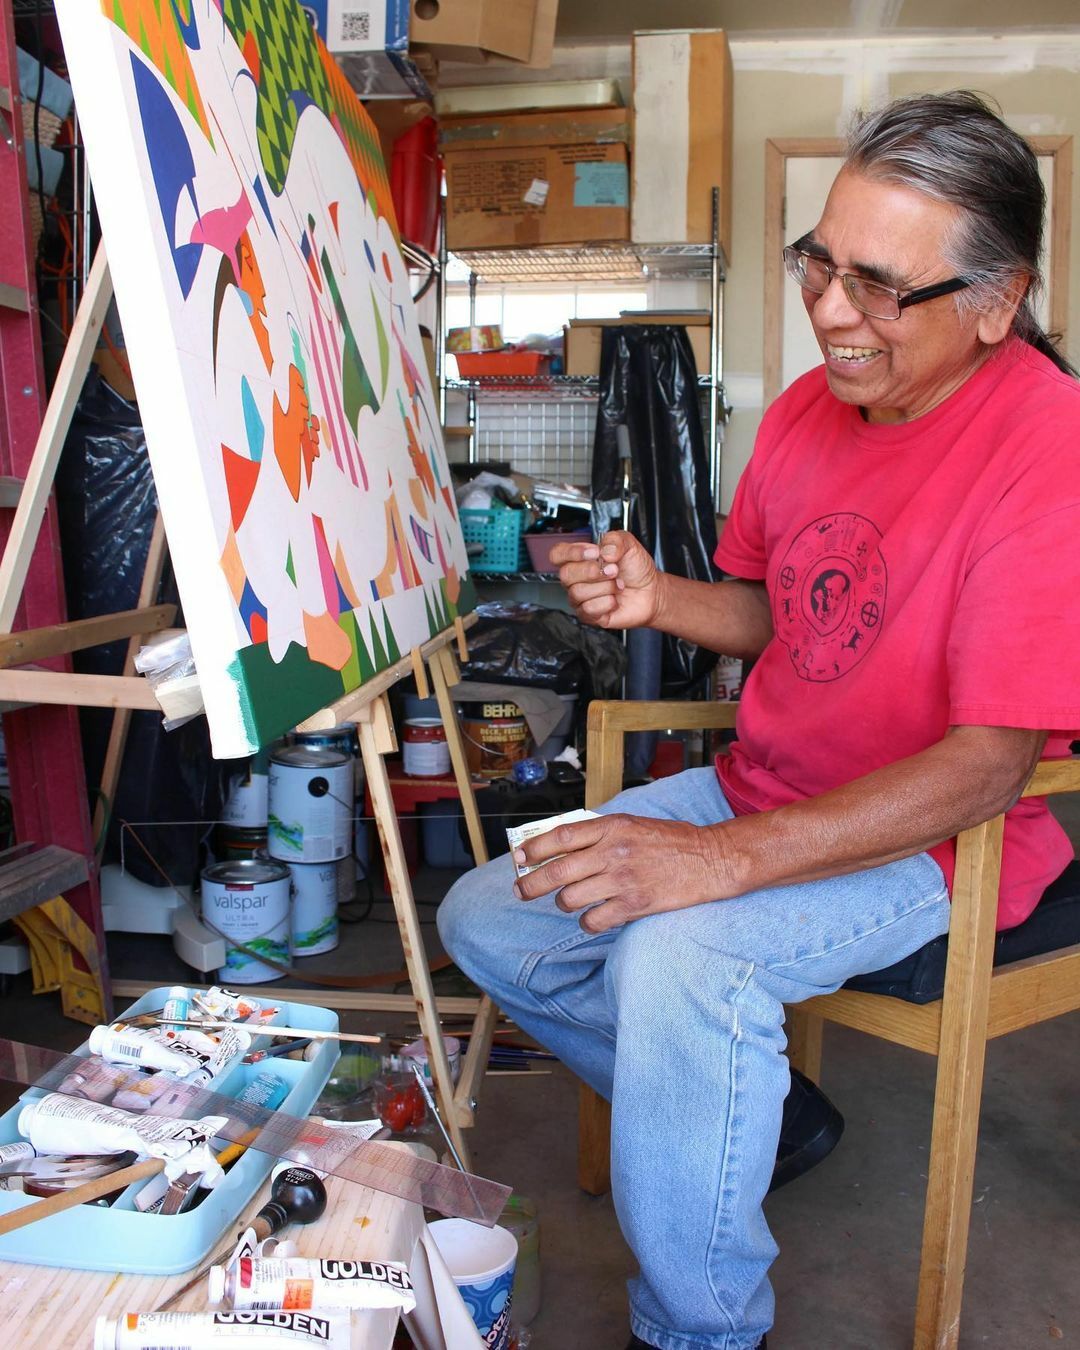 An Indigenous man in a red shirt, blue jeans and thick-framed glasses sits in front of a colorful, partially painted canvas on a wooden easel. The man is smiling and holding a paint brush.